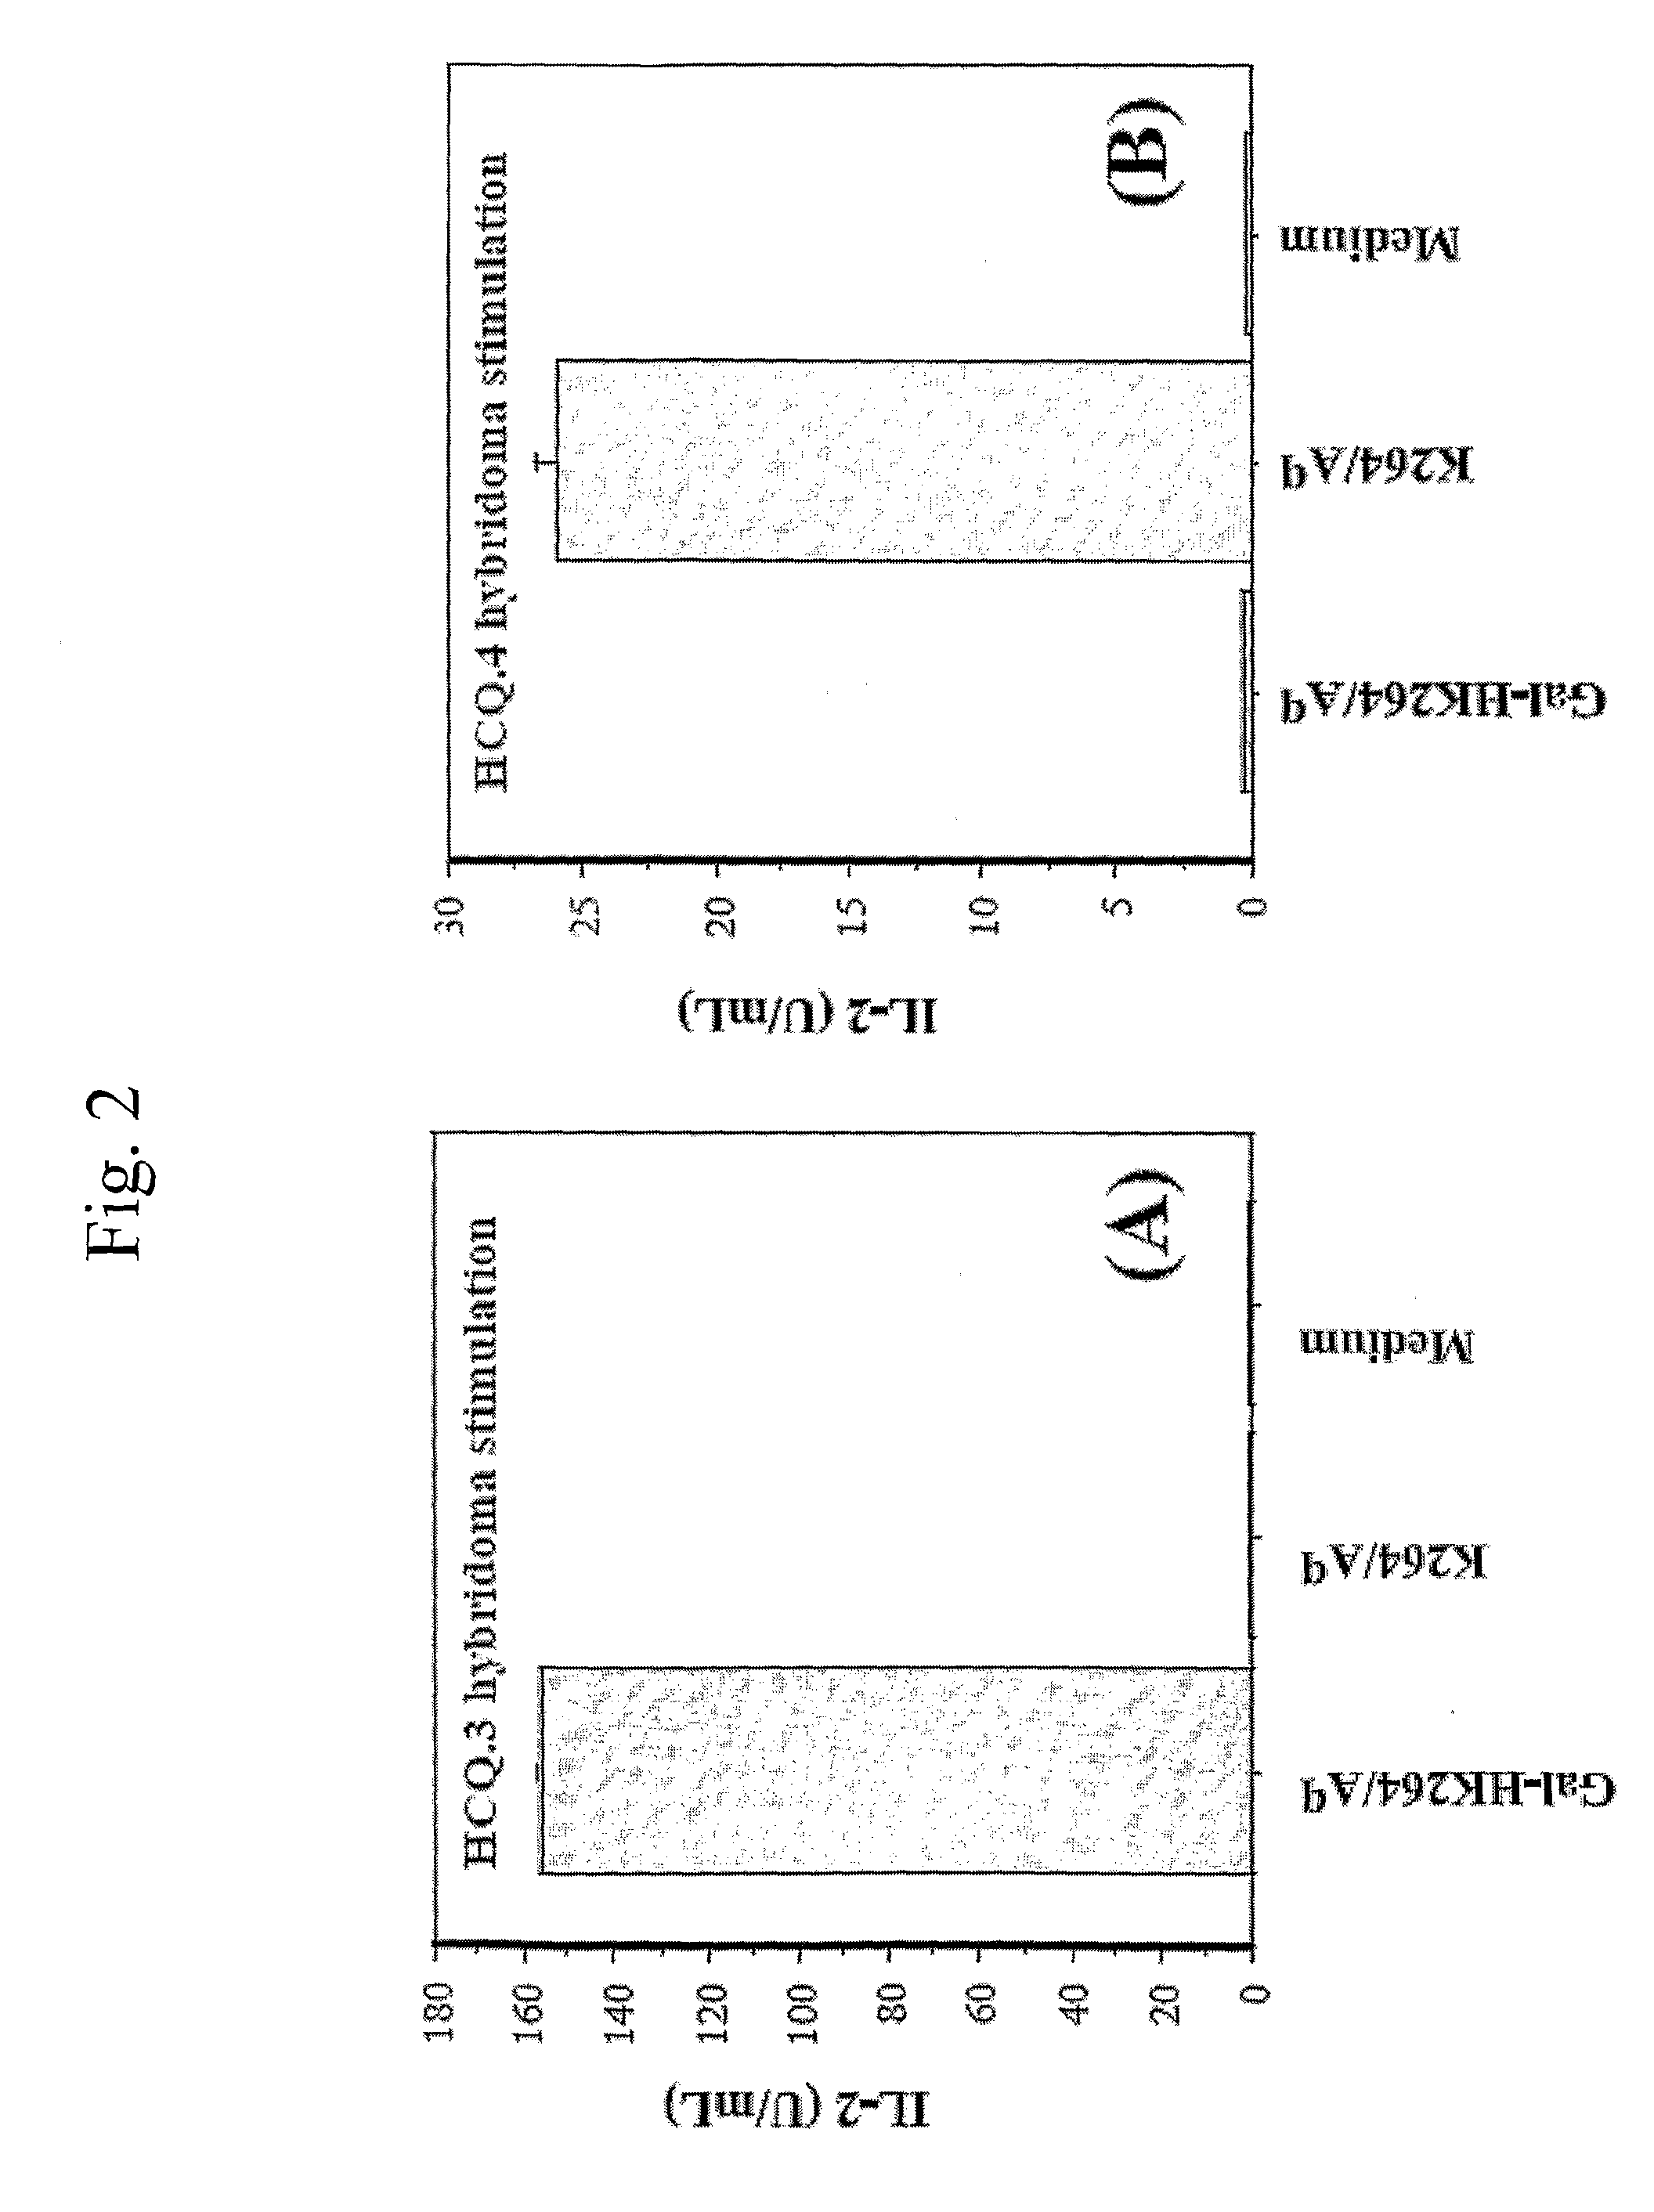 Compound comprising an autoantigenic peptide and a carrier with a mhc binding motif